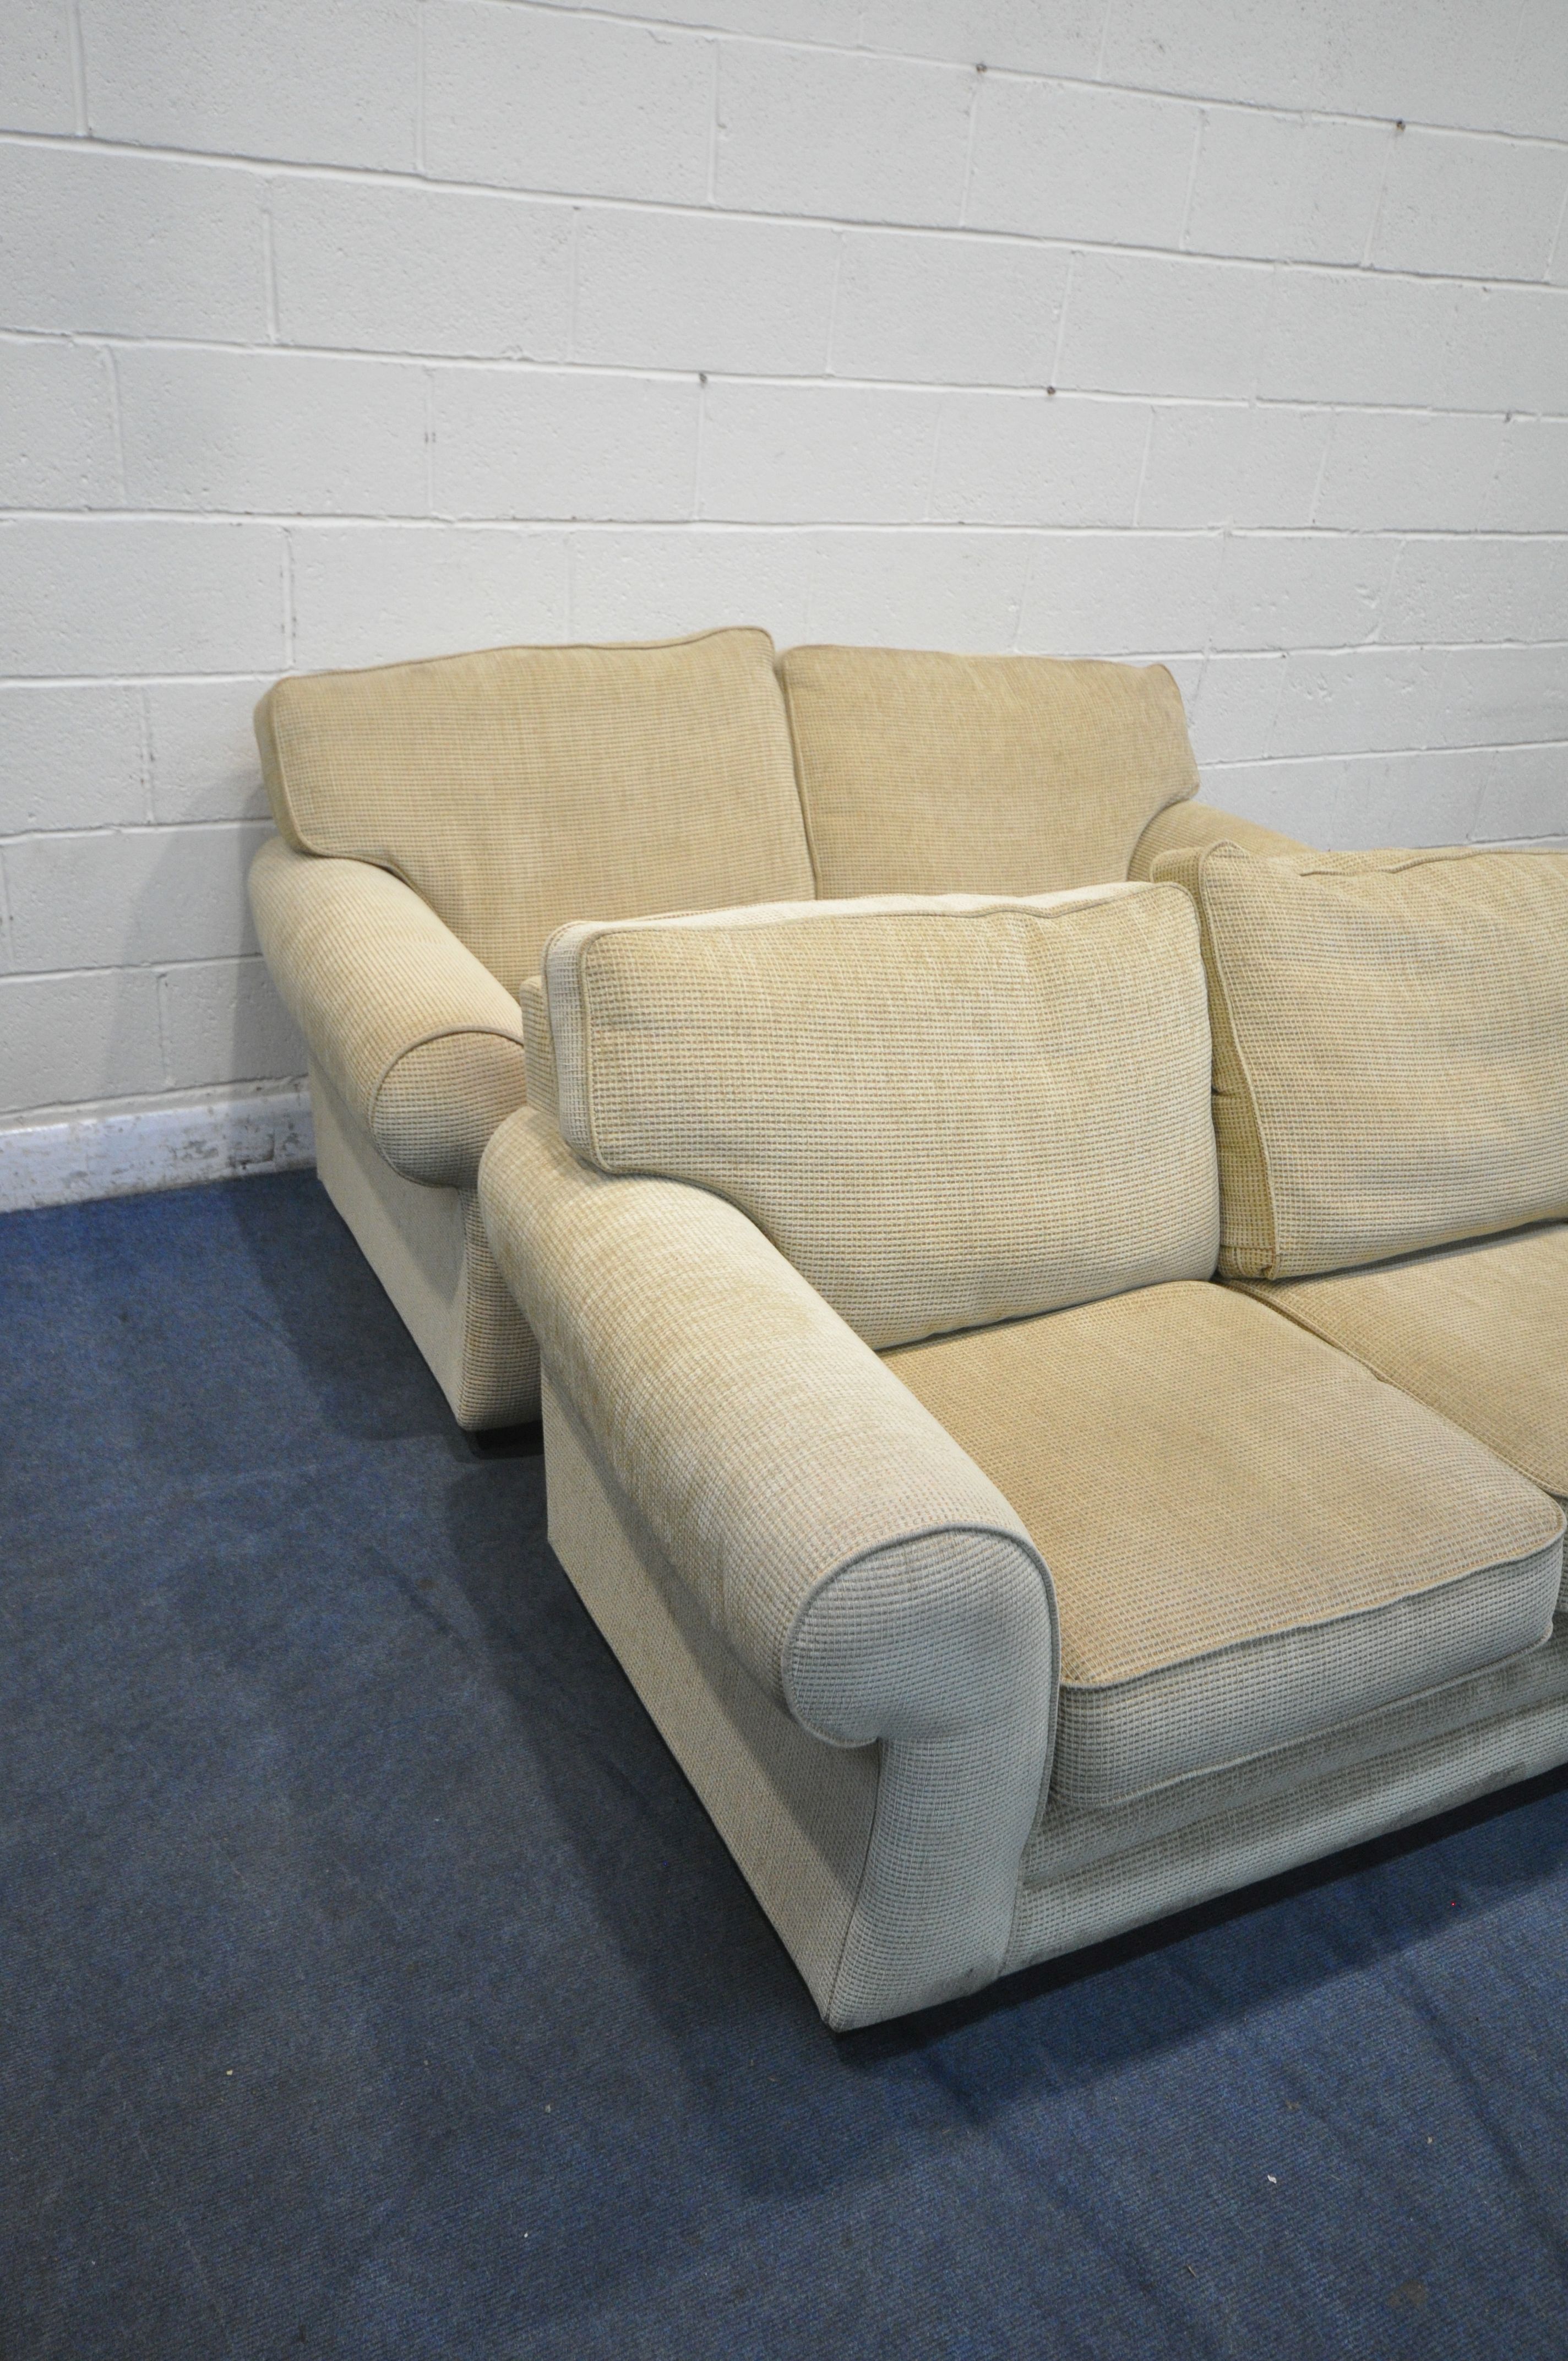 A PAIR OF BEIGE UPHOLSTERED TWO SEATER SOFAS, length 180cm x depth 94cm x height 84cm (condition - Image 2 of 3